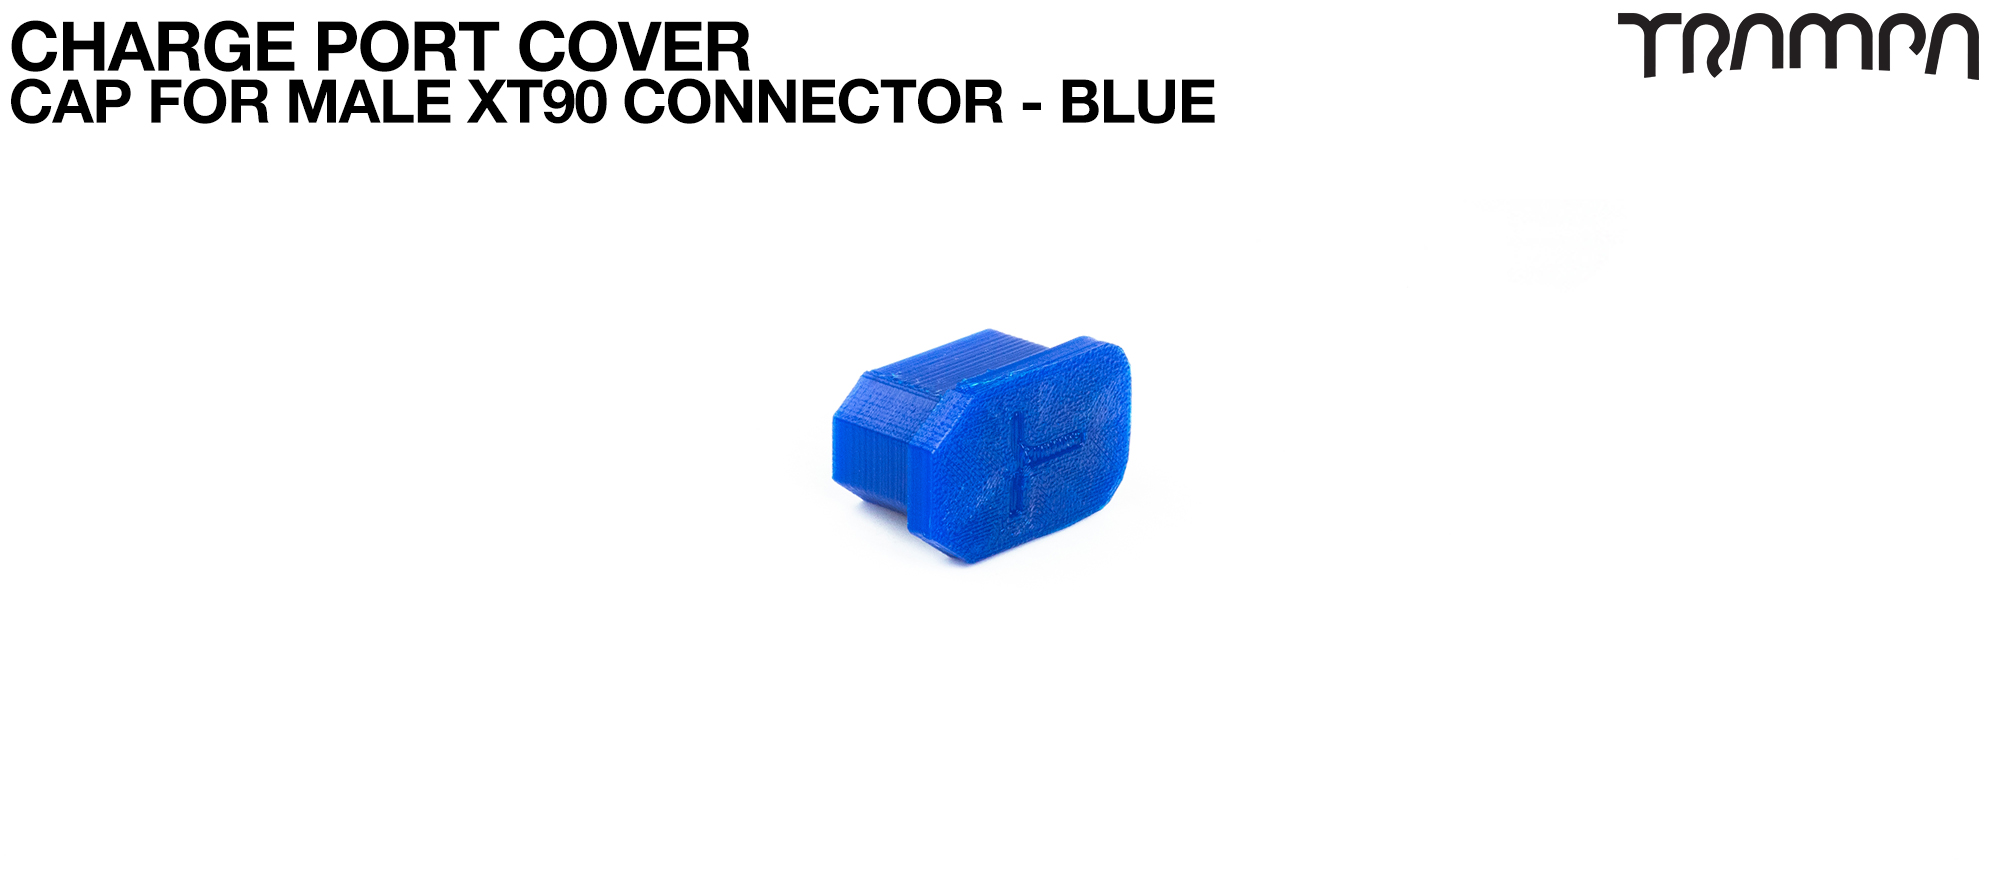 Charge Port Cover - CAP for Male XT90 Connector BLUE